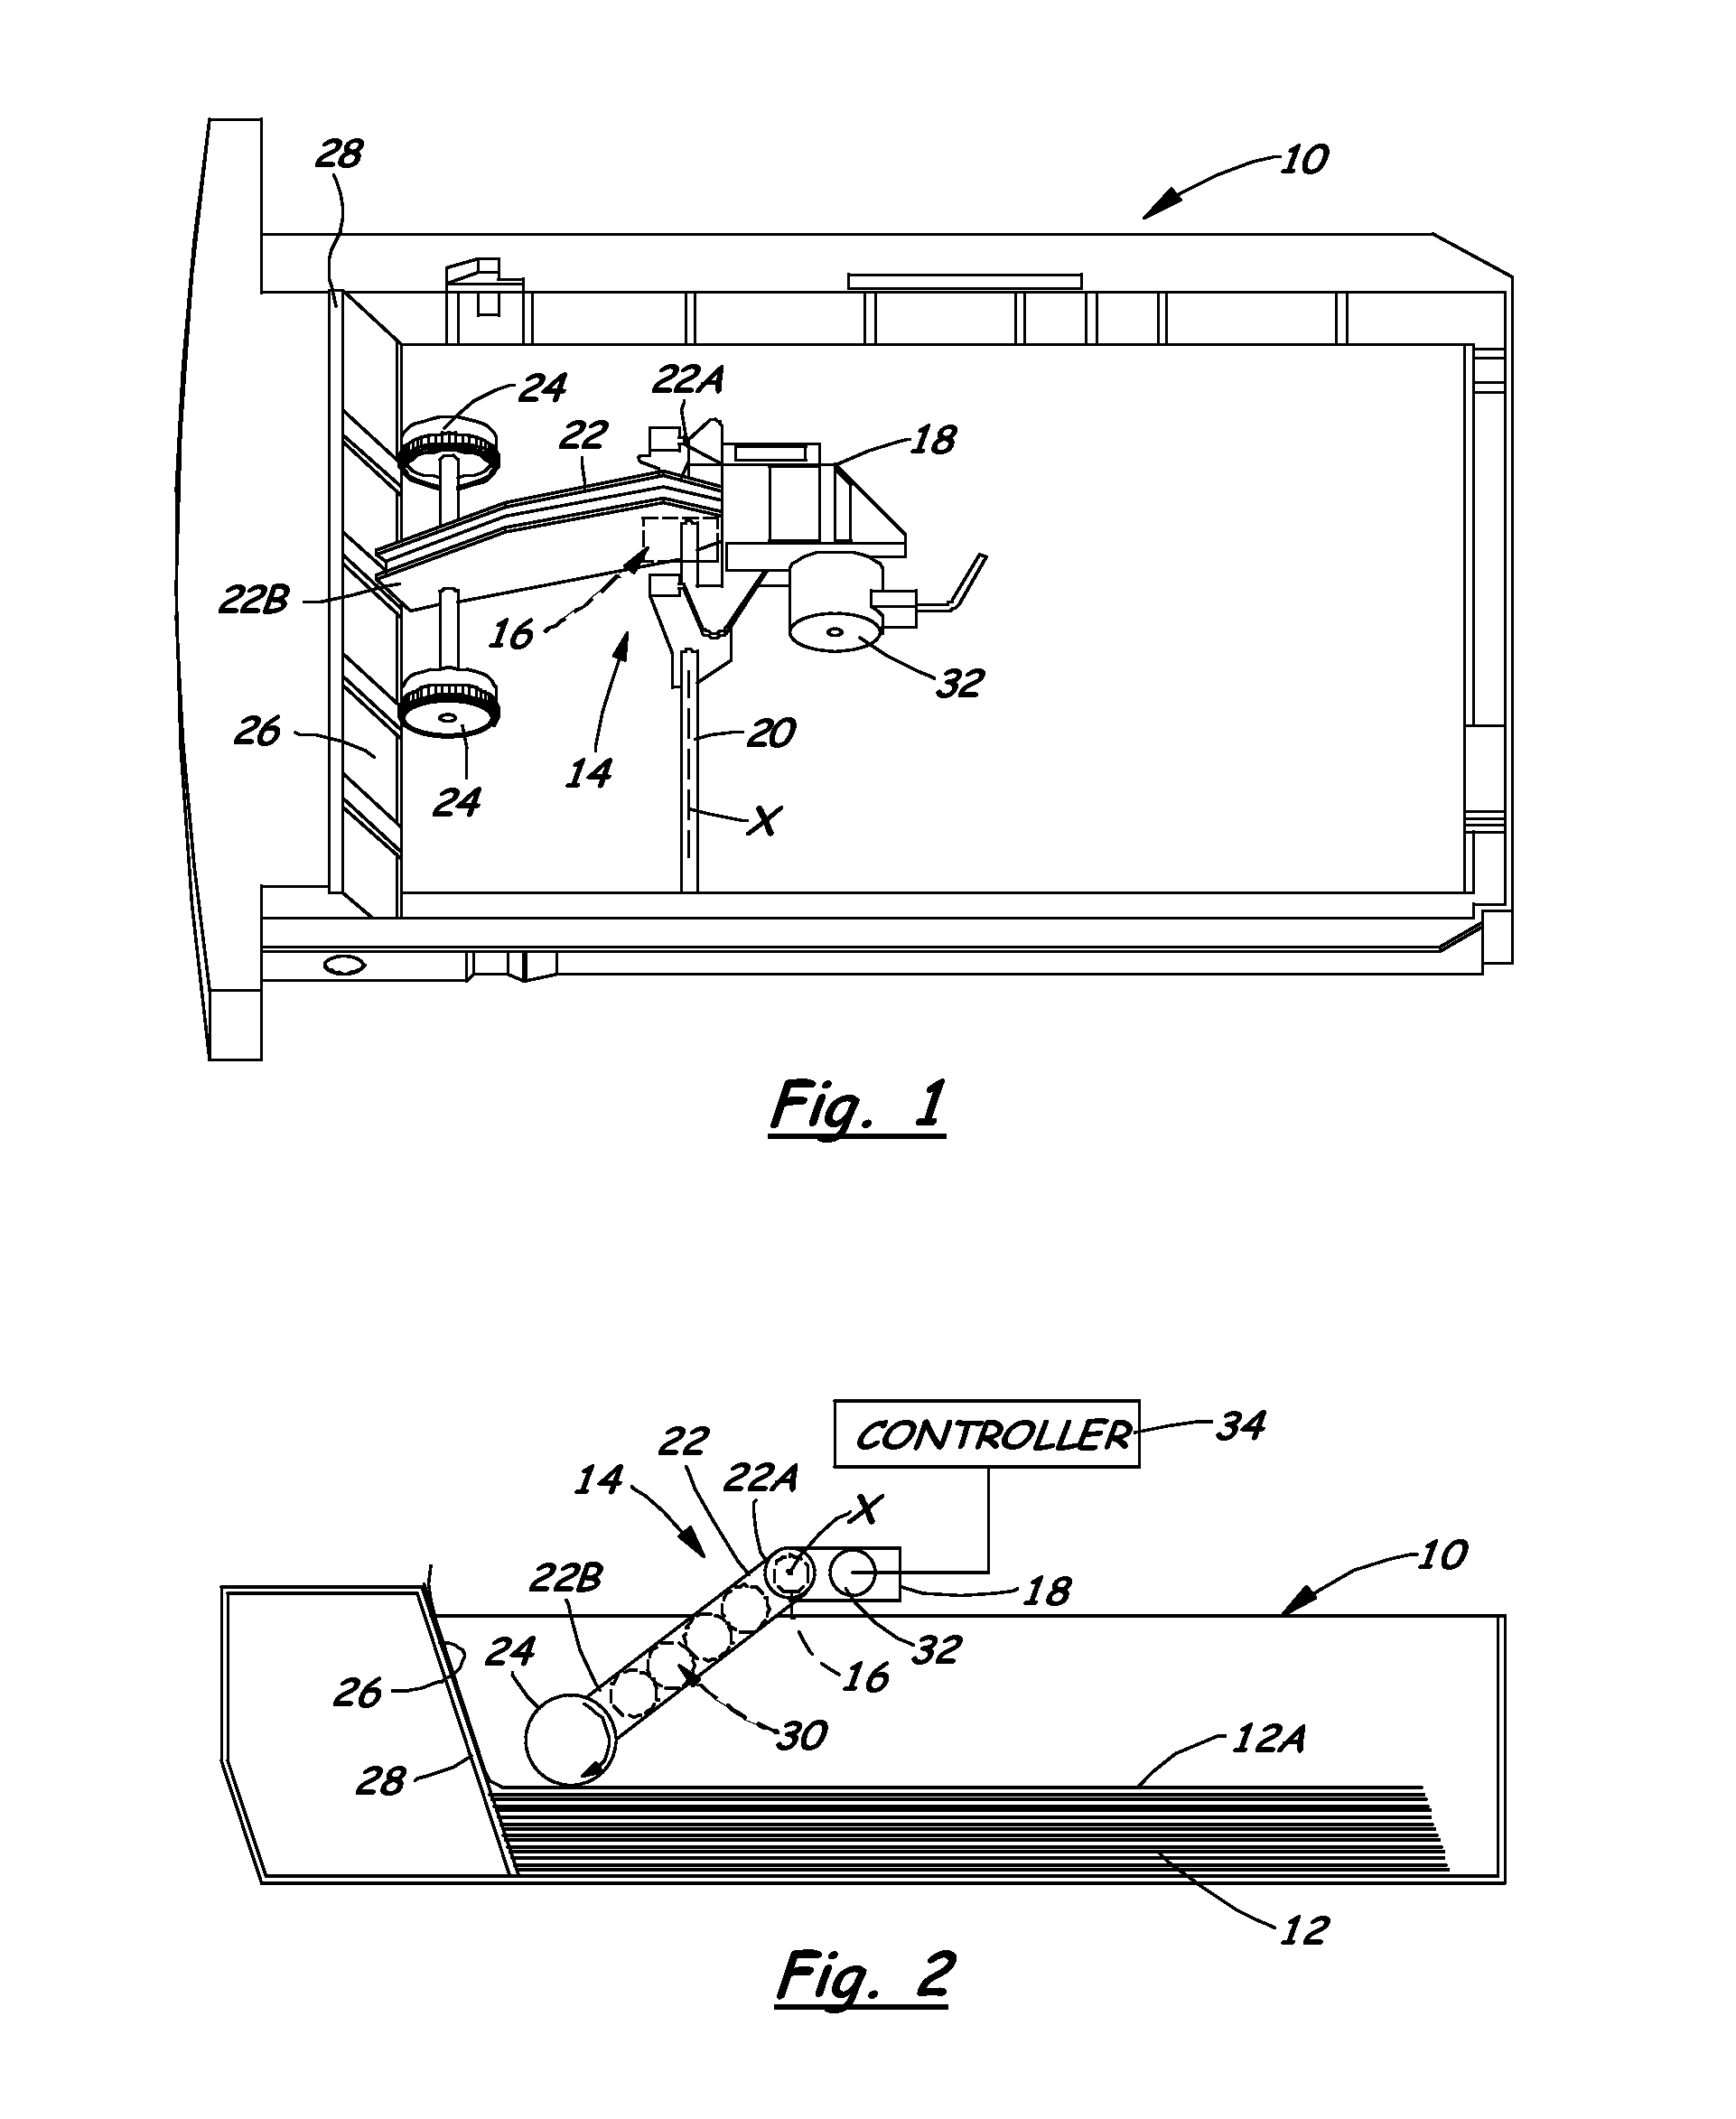 Method For Calibrating Stack Height Sensing In A Media Stack Height Monitoring System In An Image Forming Machine